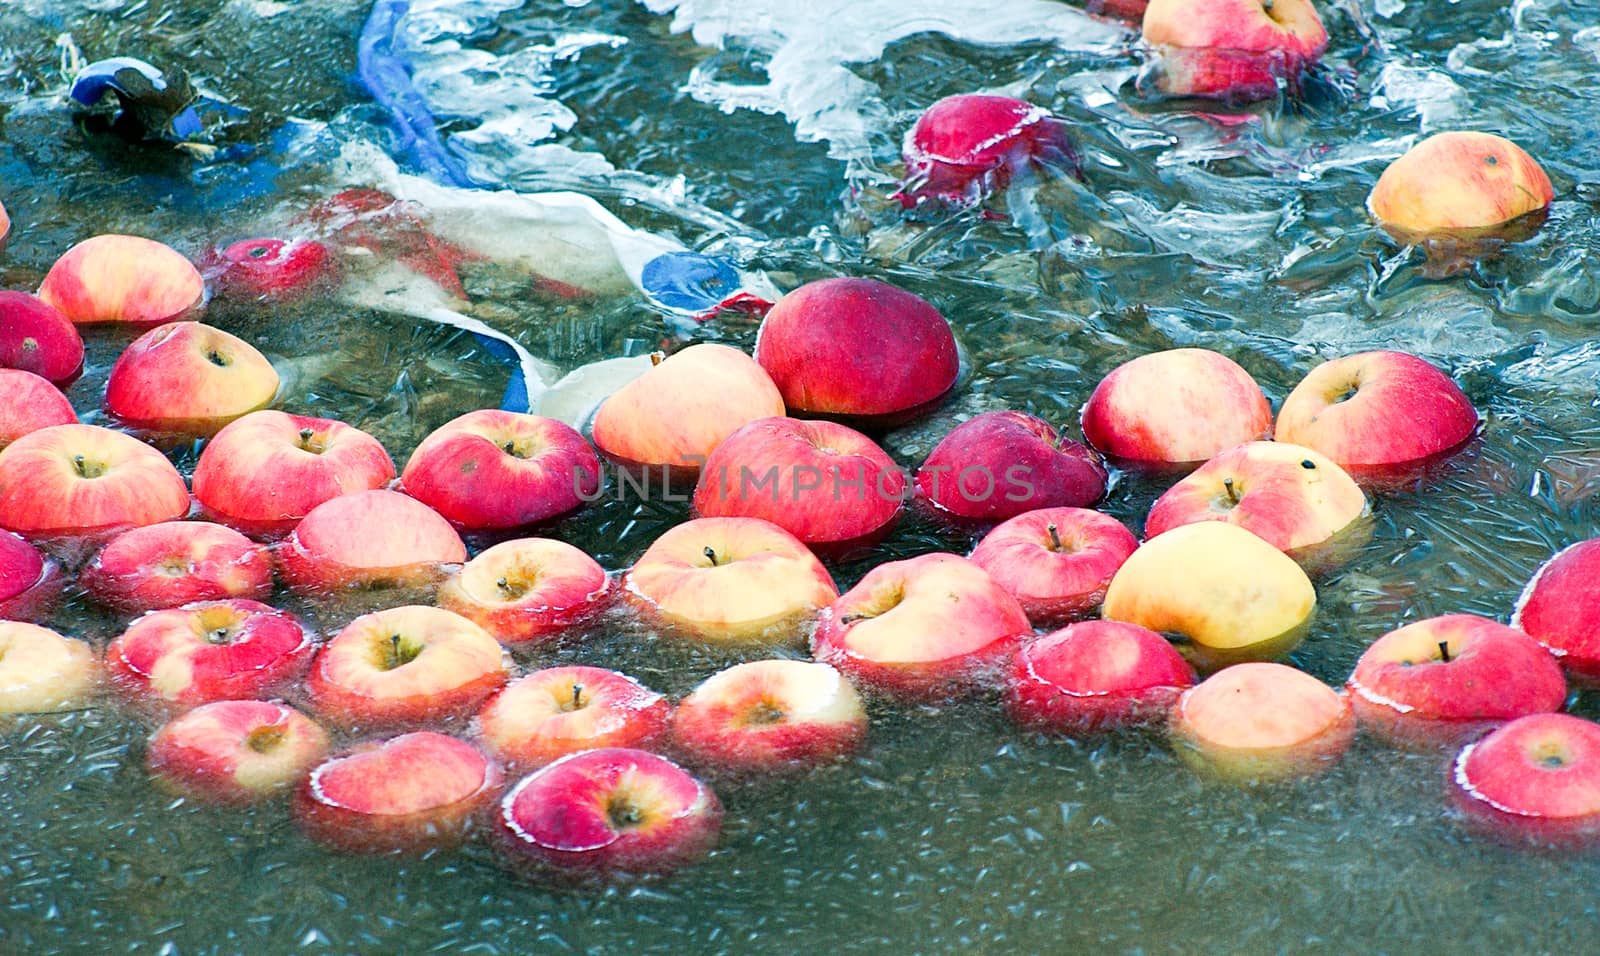 Picture of an Apples trapped in a frozen water